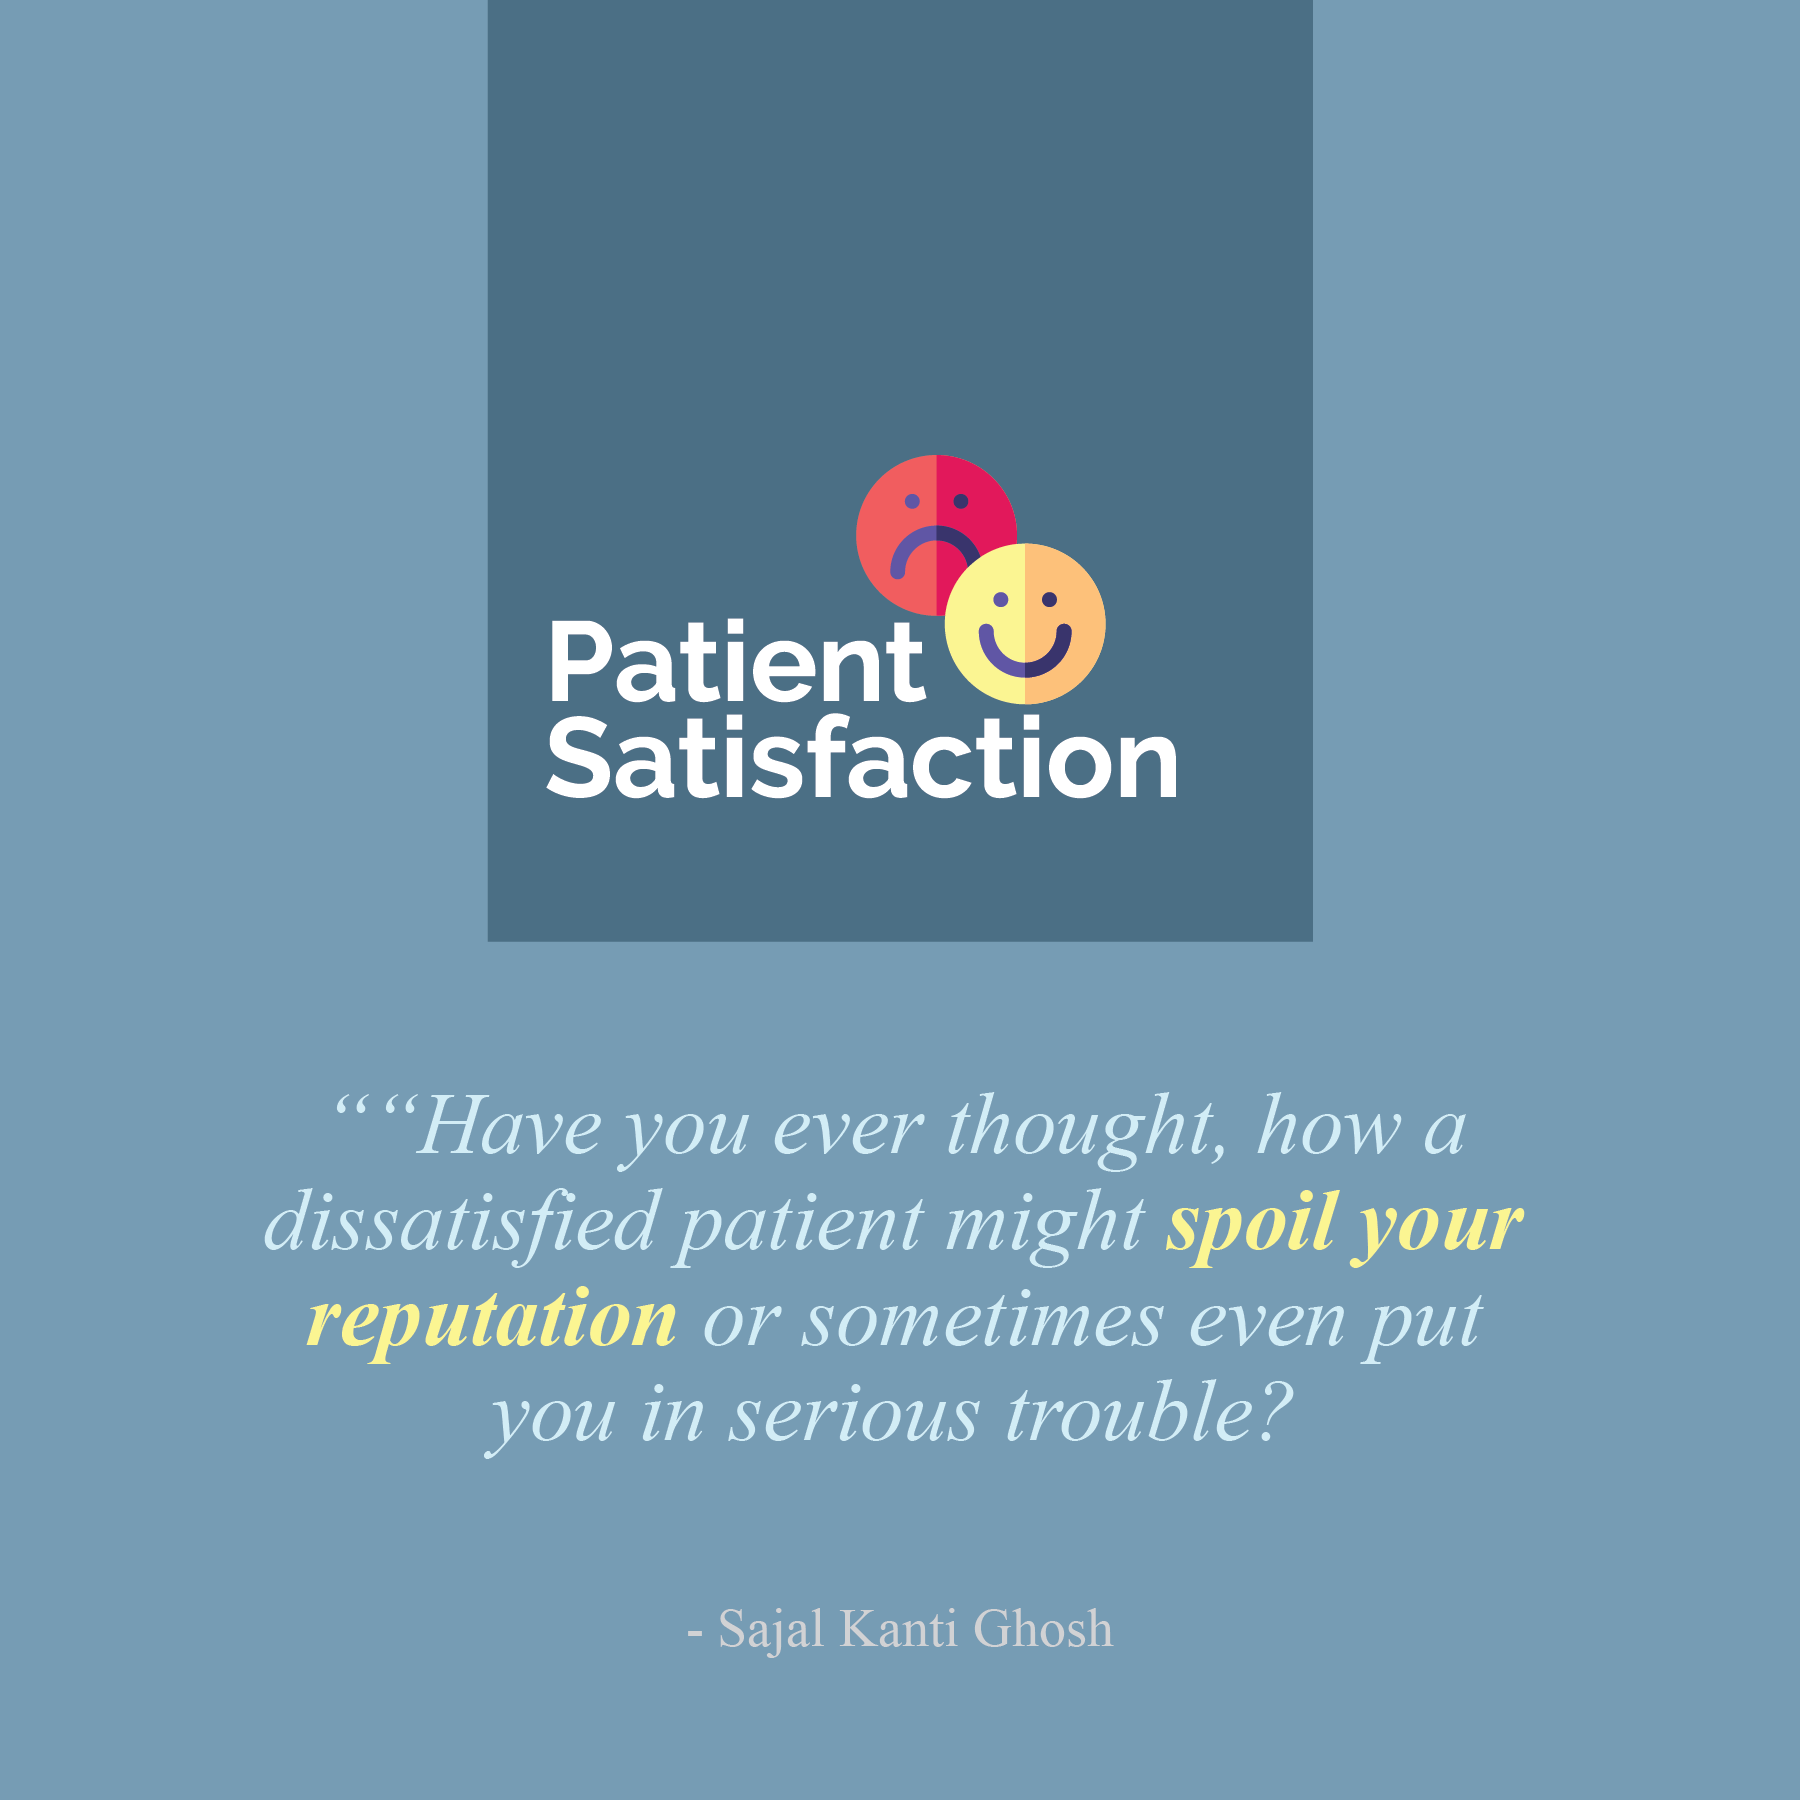 Patient Satisfaction : Why you should care about it.